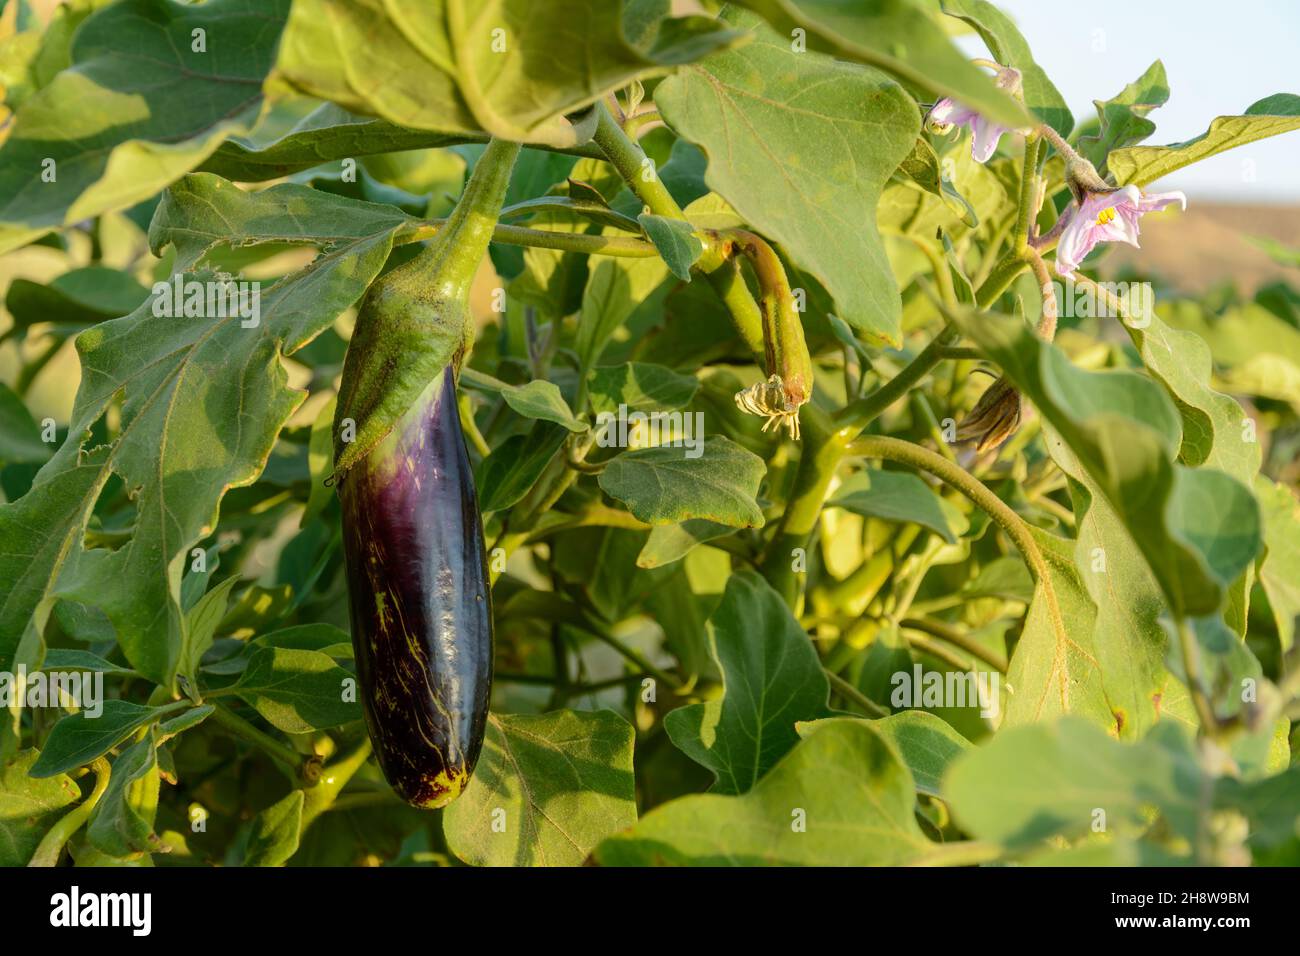 Eggplant hanging from the plant in the garden. Fresh organic eggplant aubergine and its flower with morning light on it. side view from Purple aubergi Stock Photo